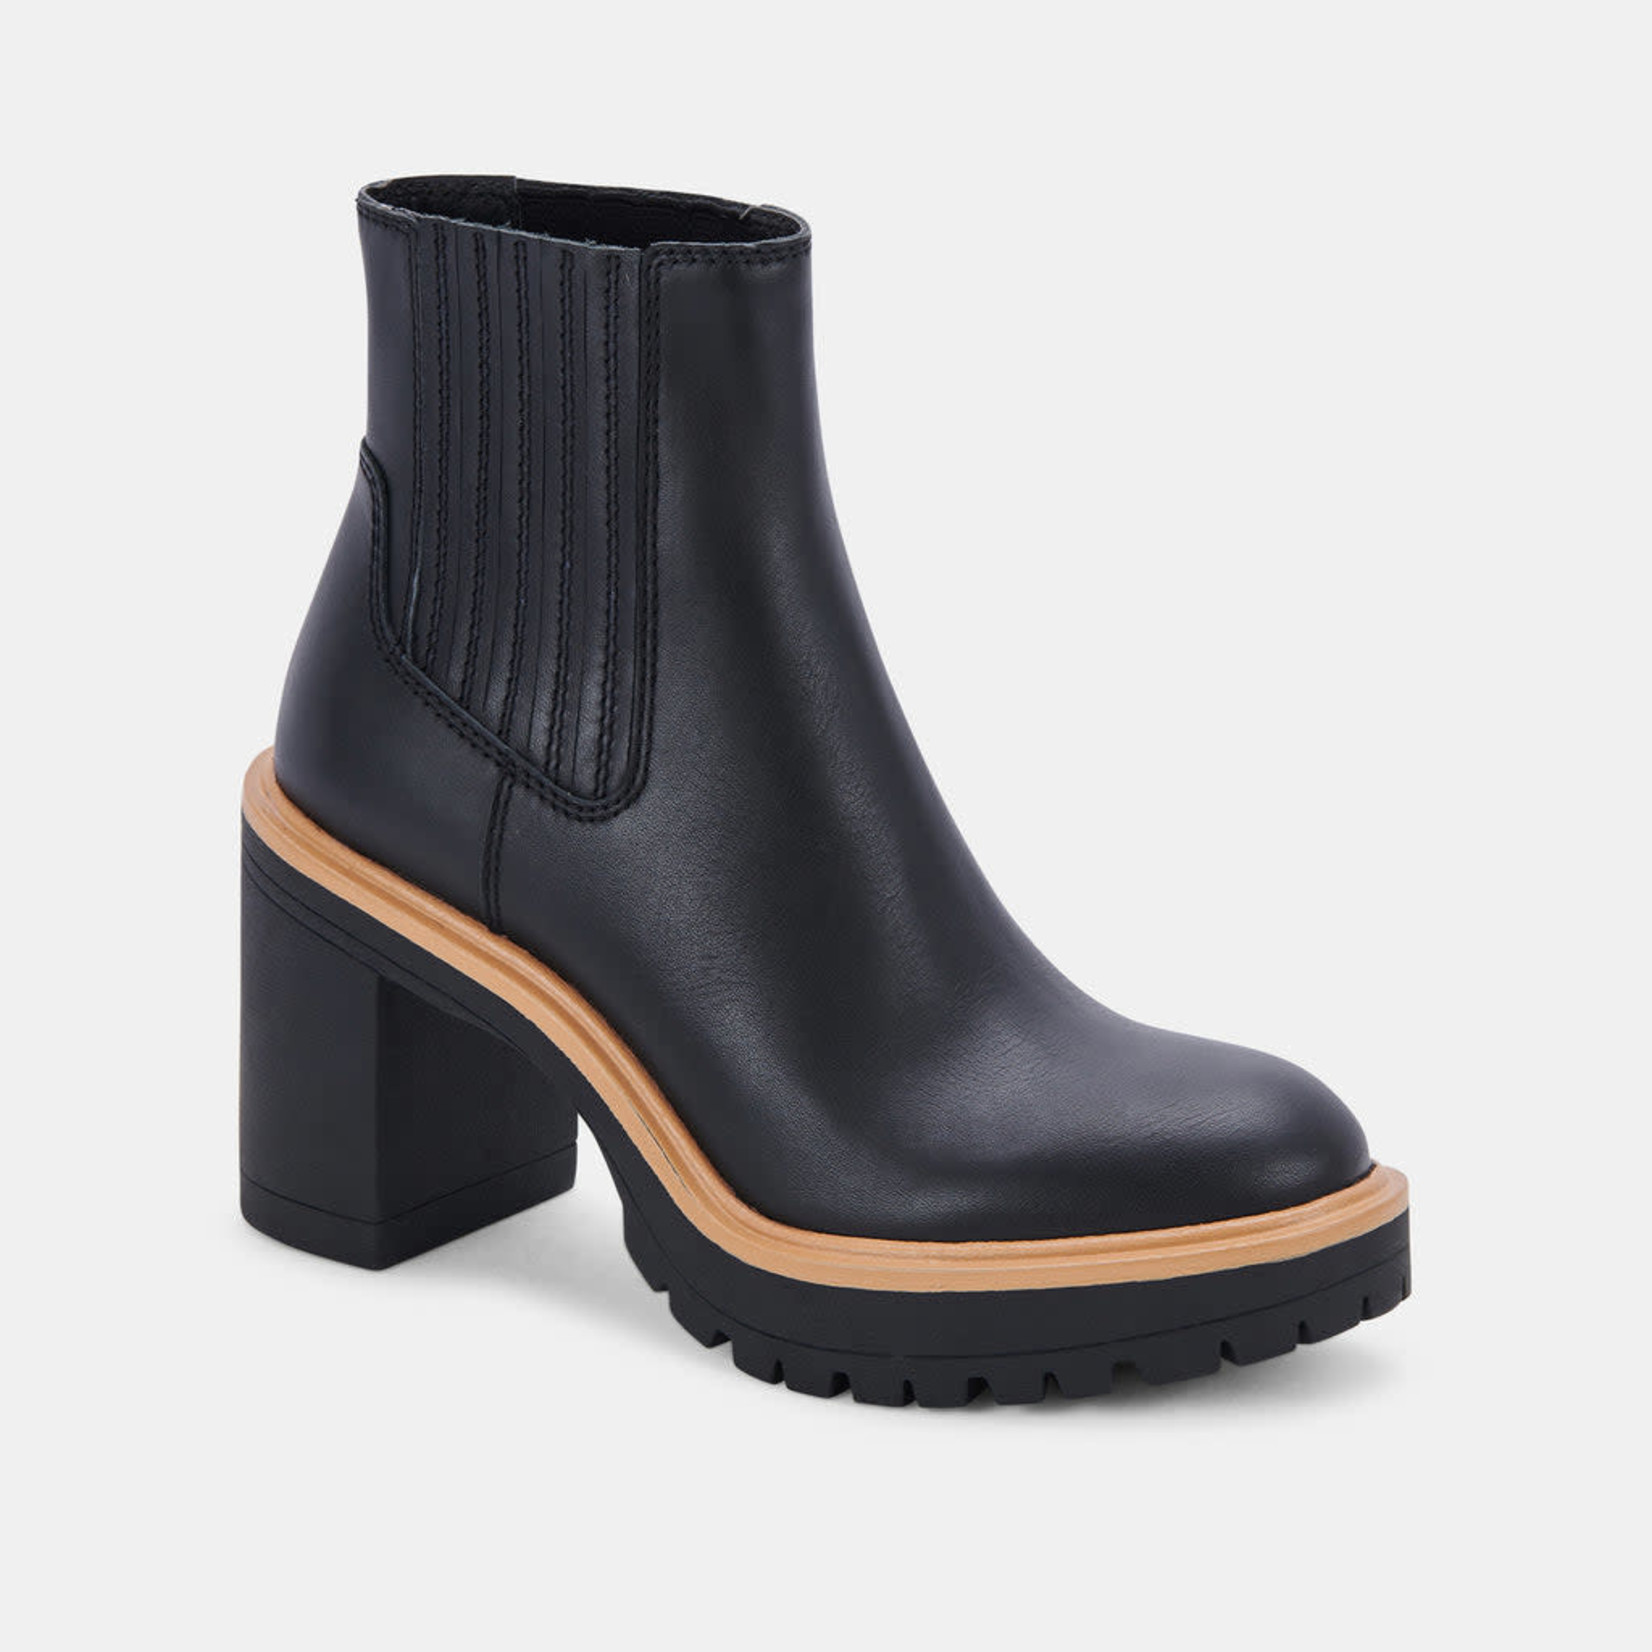 Caster H20 Black Leather by Dolce Vita - For The Love of Shoes NY